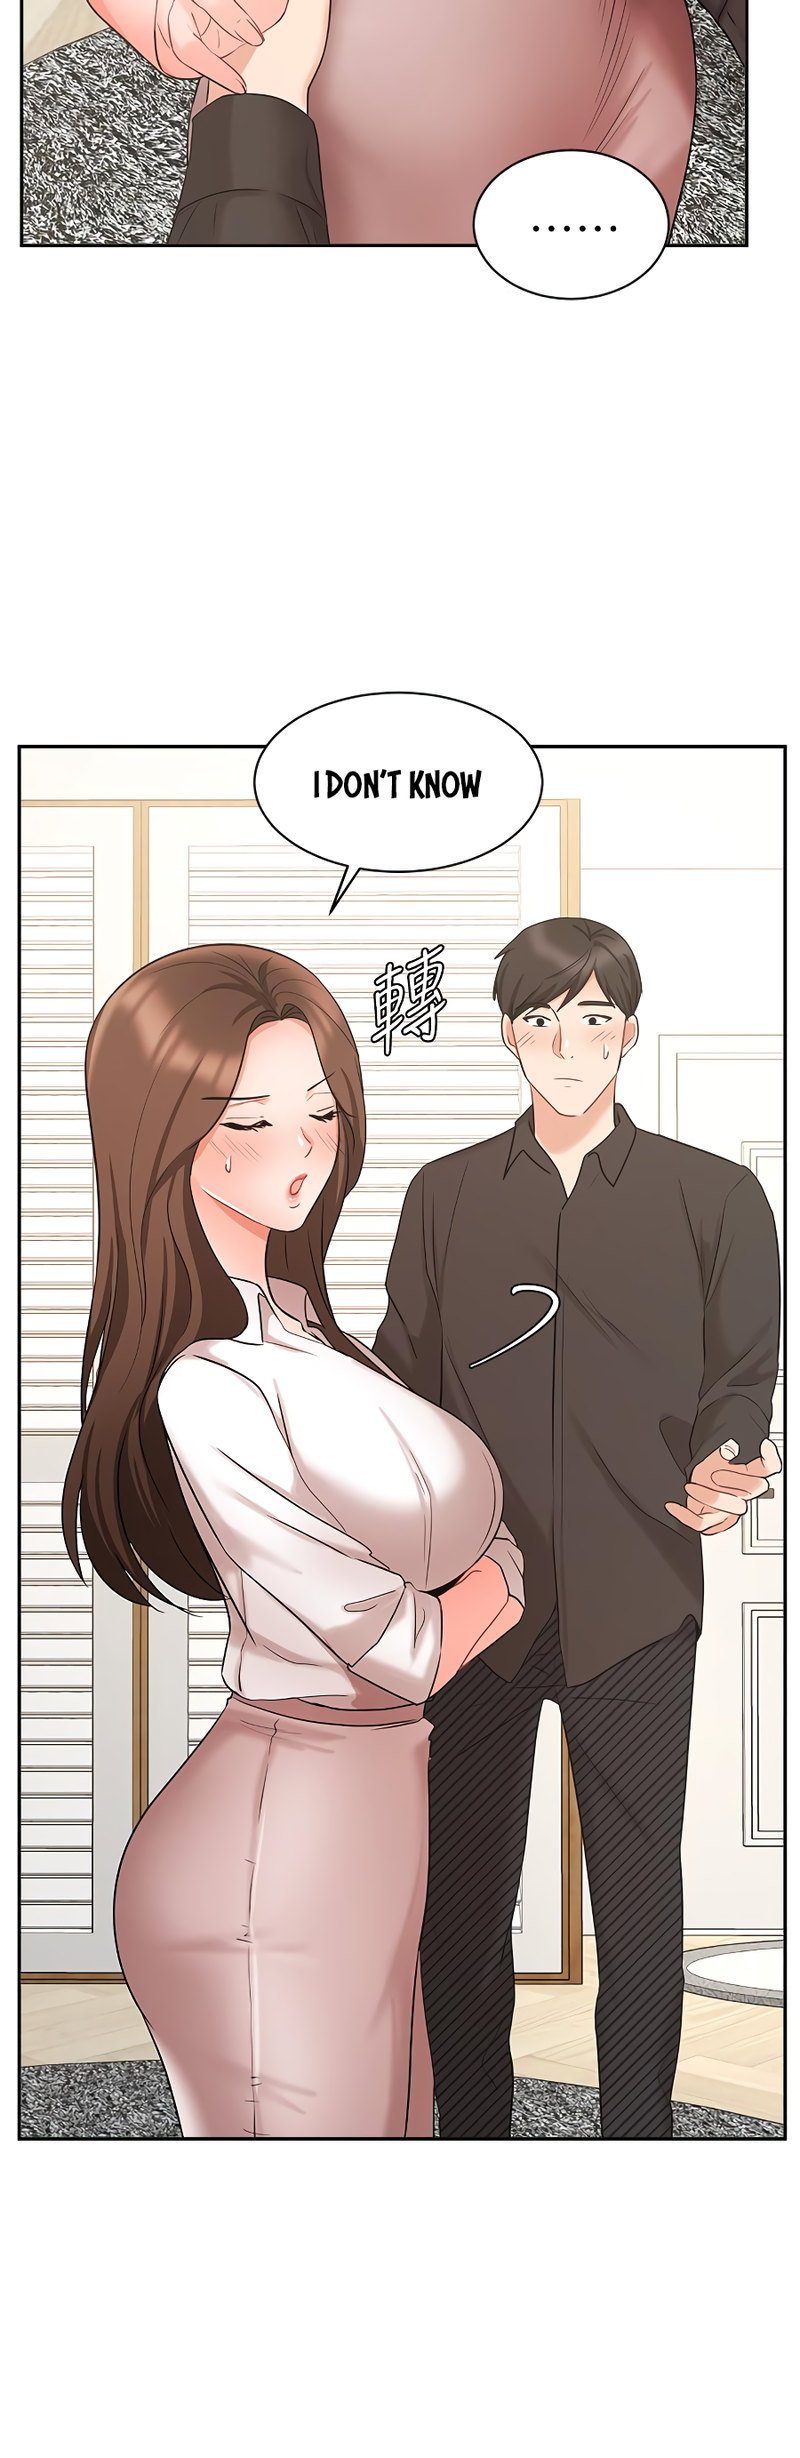 sold-out-girl-chap-43-15